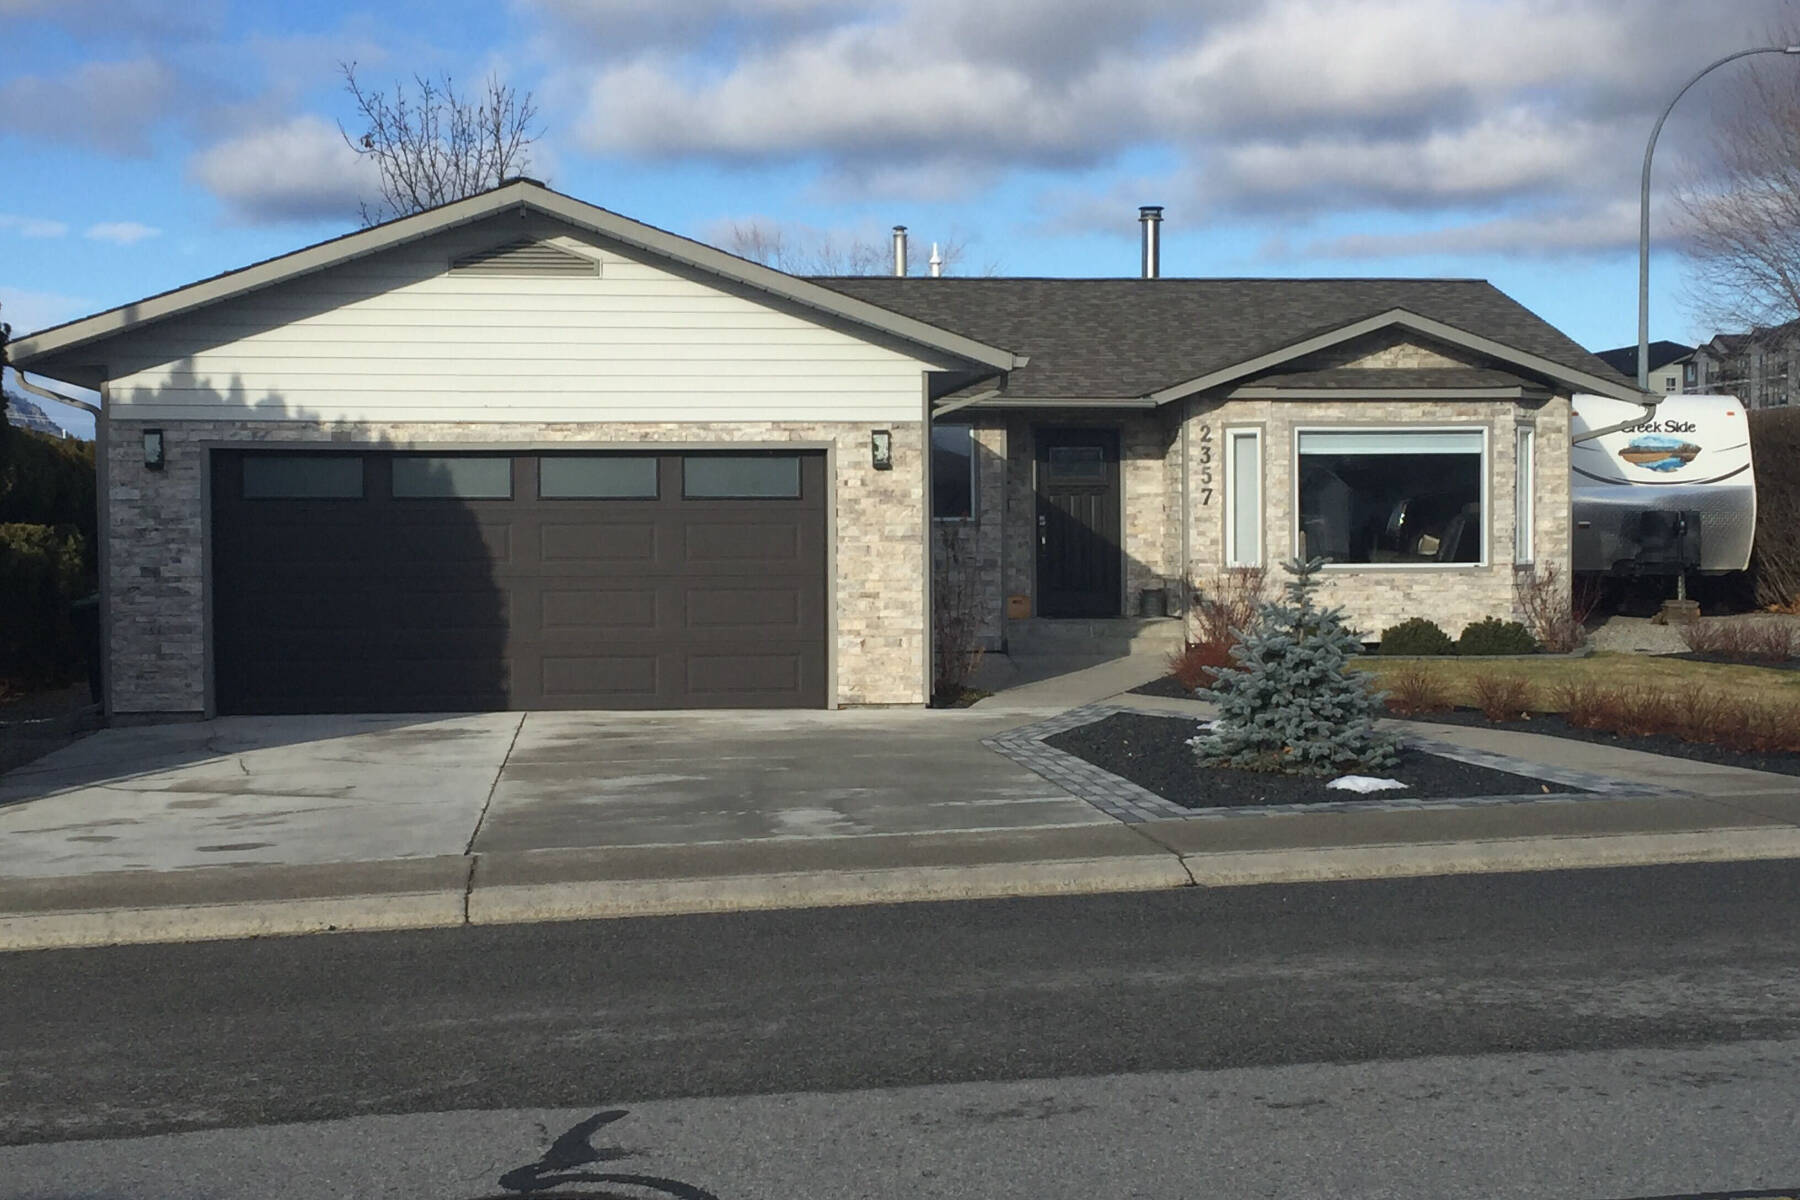 This home at 2357 Cornwall Drive was sold by the city for $150,000 at auction. It was assessed at $420,000. BC Ombudsperson filed a report saying the city failed to help a vulnerable person and sold her home over not paying $10,000 property tax. (Logan Lockhart Western News)